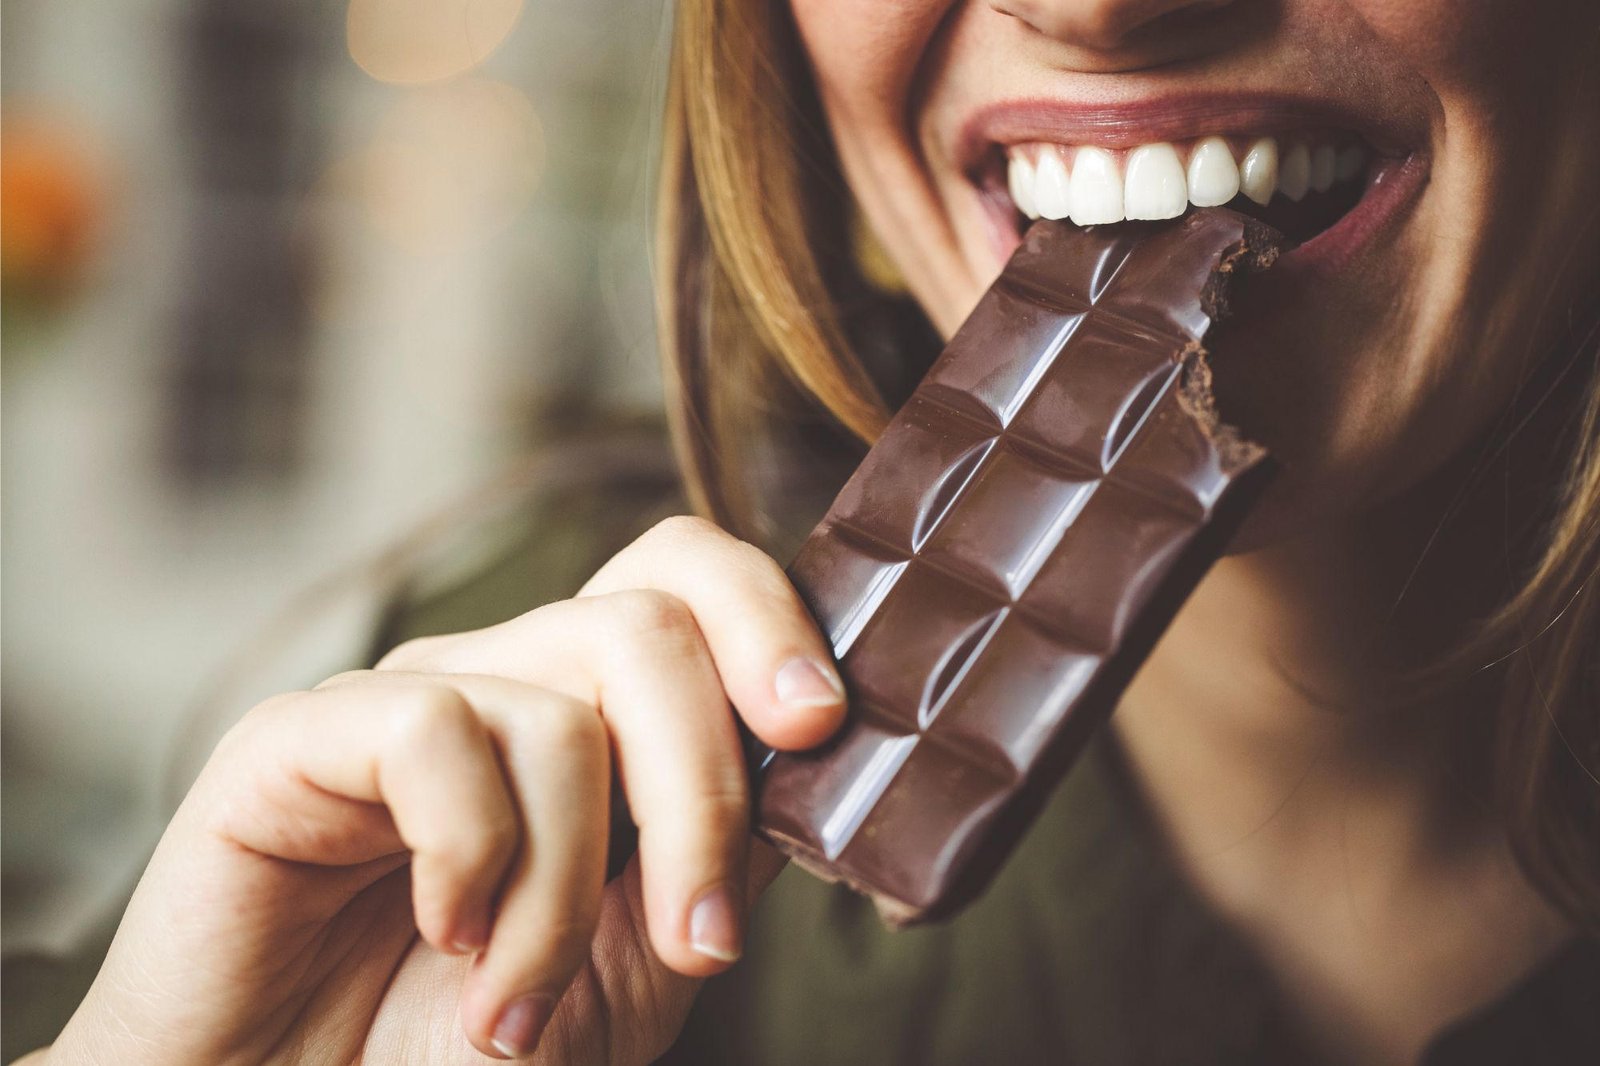 Researchers Develop Healthier, Sustainable Chocolate